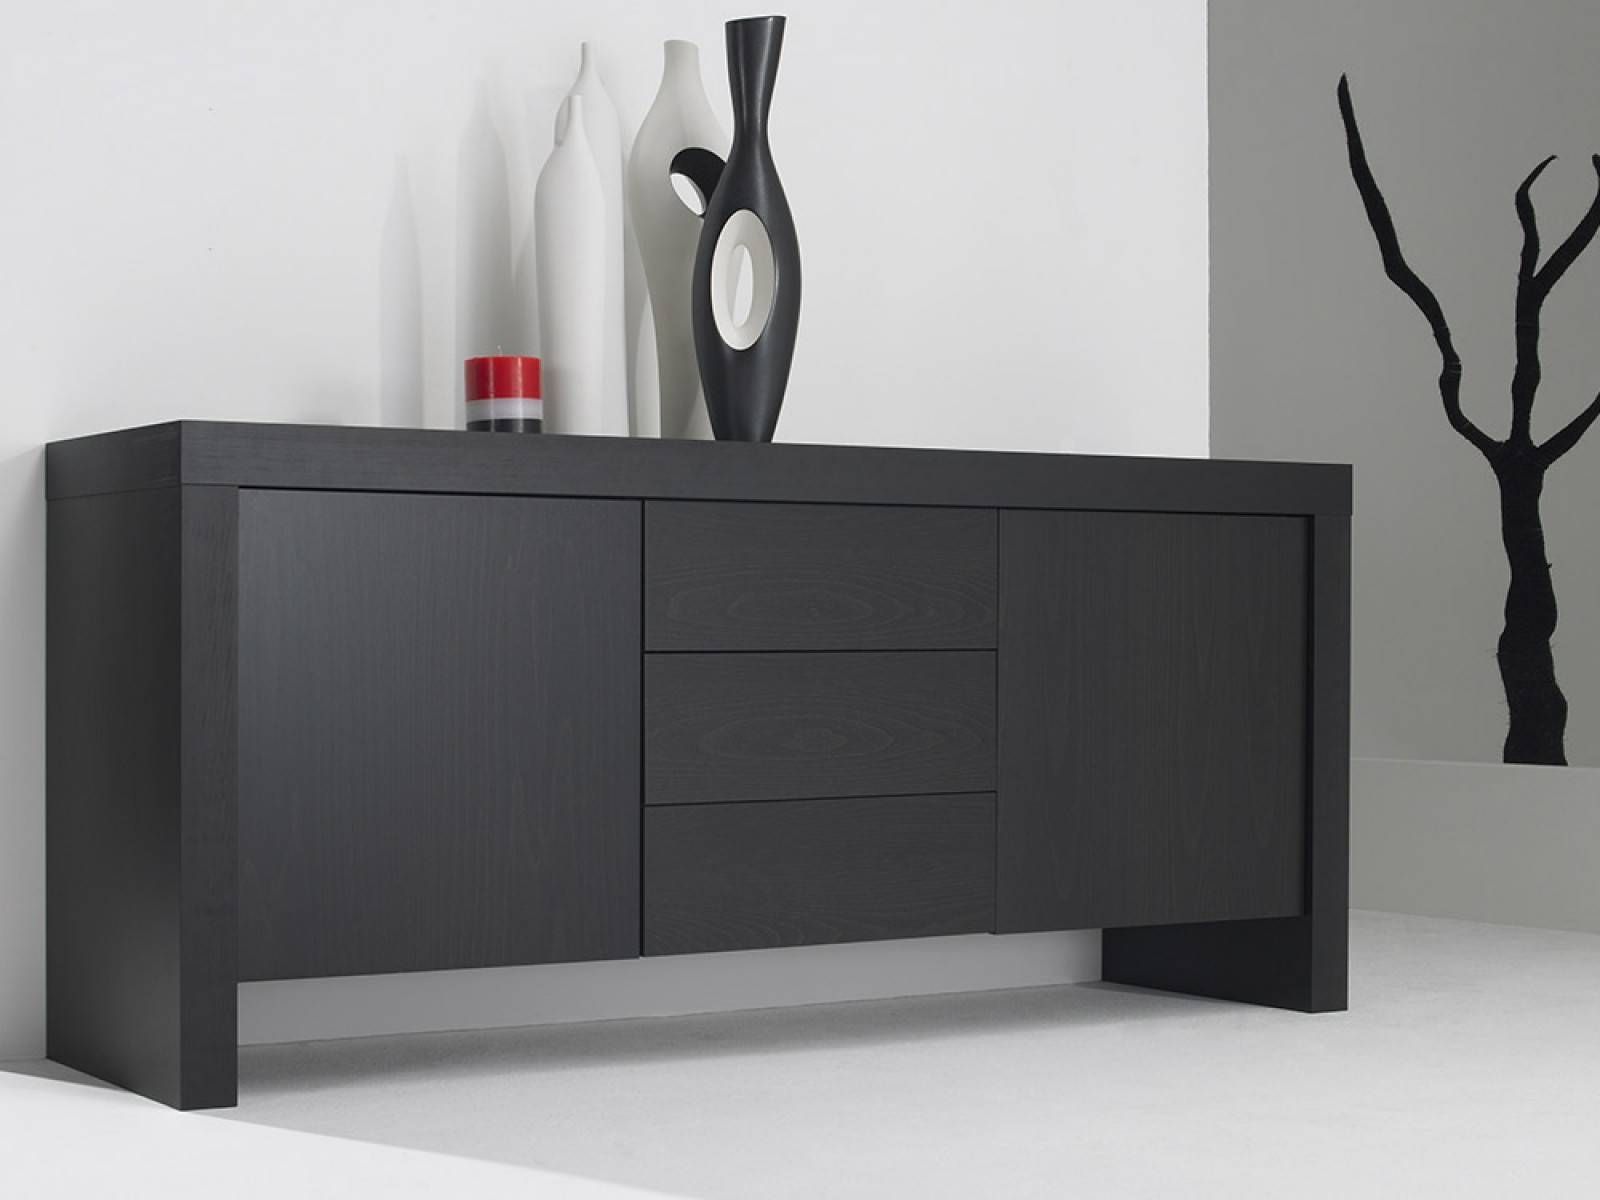 Tremendous Modern Dark Grey Sideboard Design With Two Cabinet Throughout Dark Grey Sideboards (View 2 of 30)